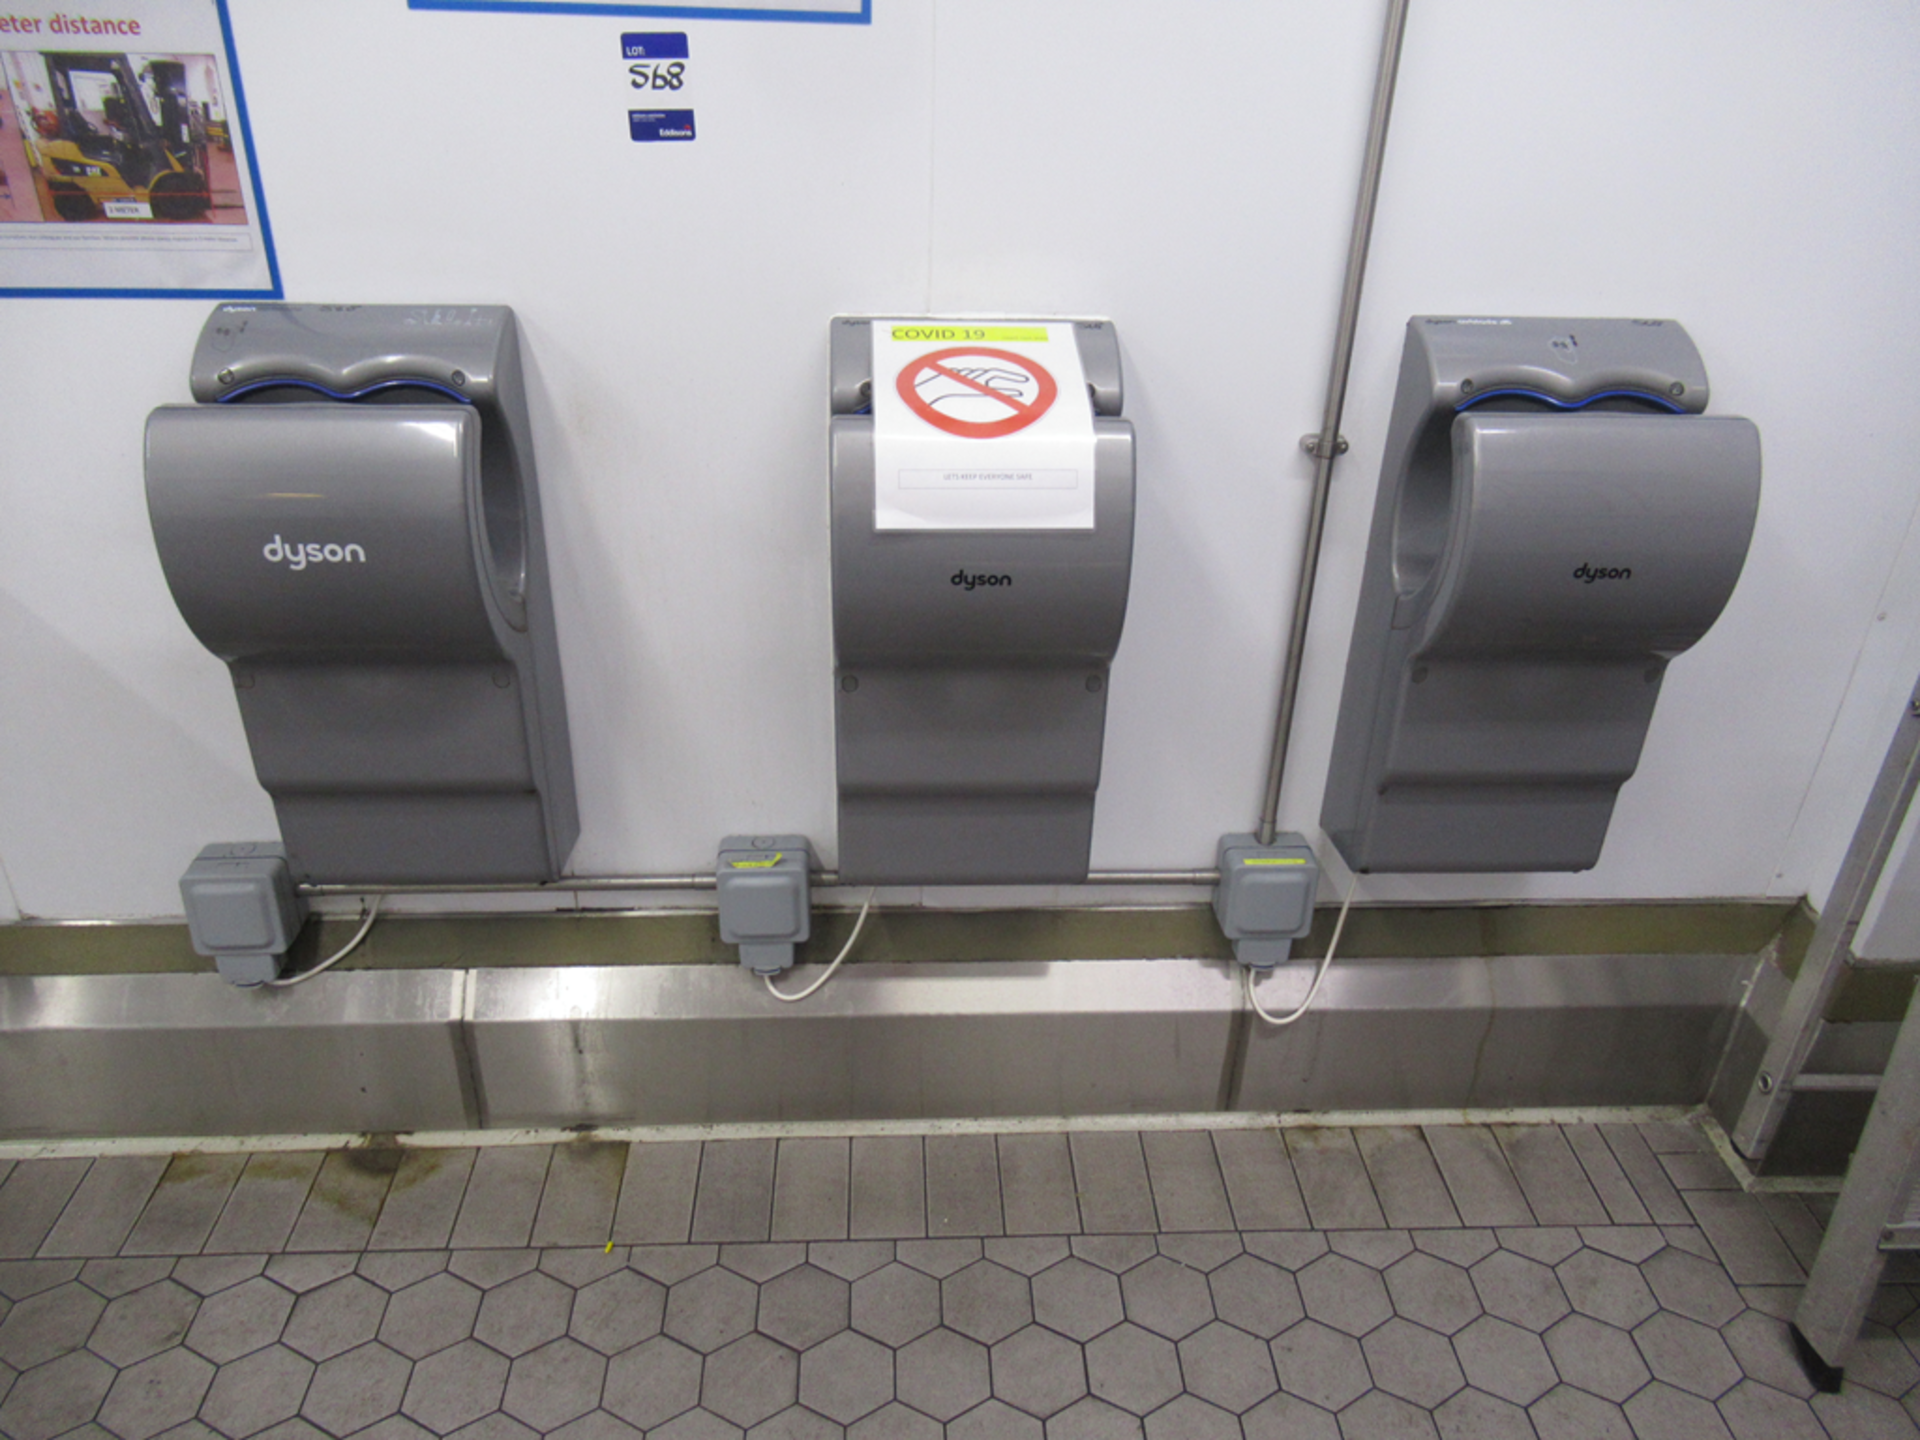 3 x Dyson Airblade Hand Dryers